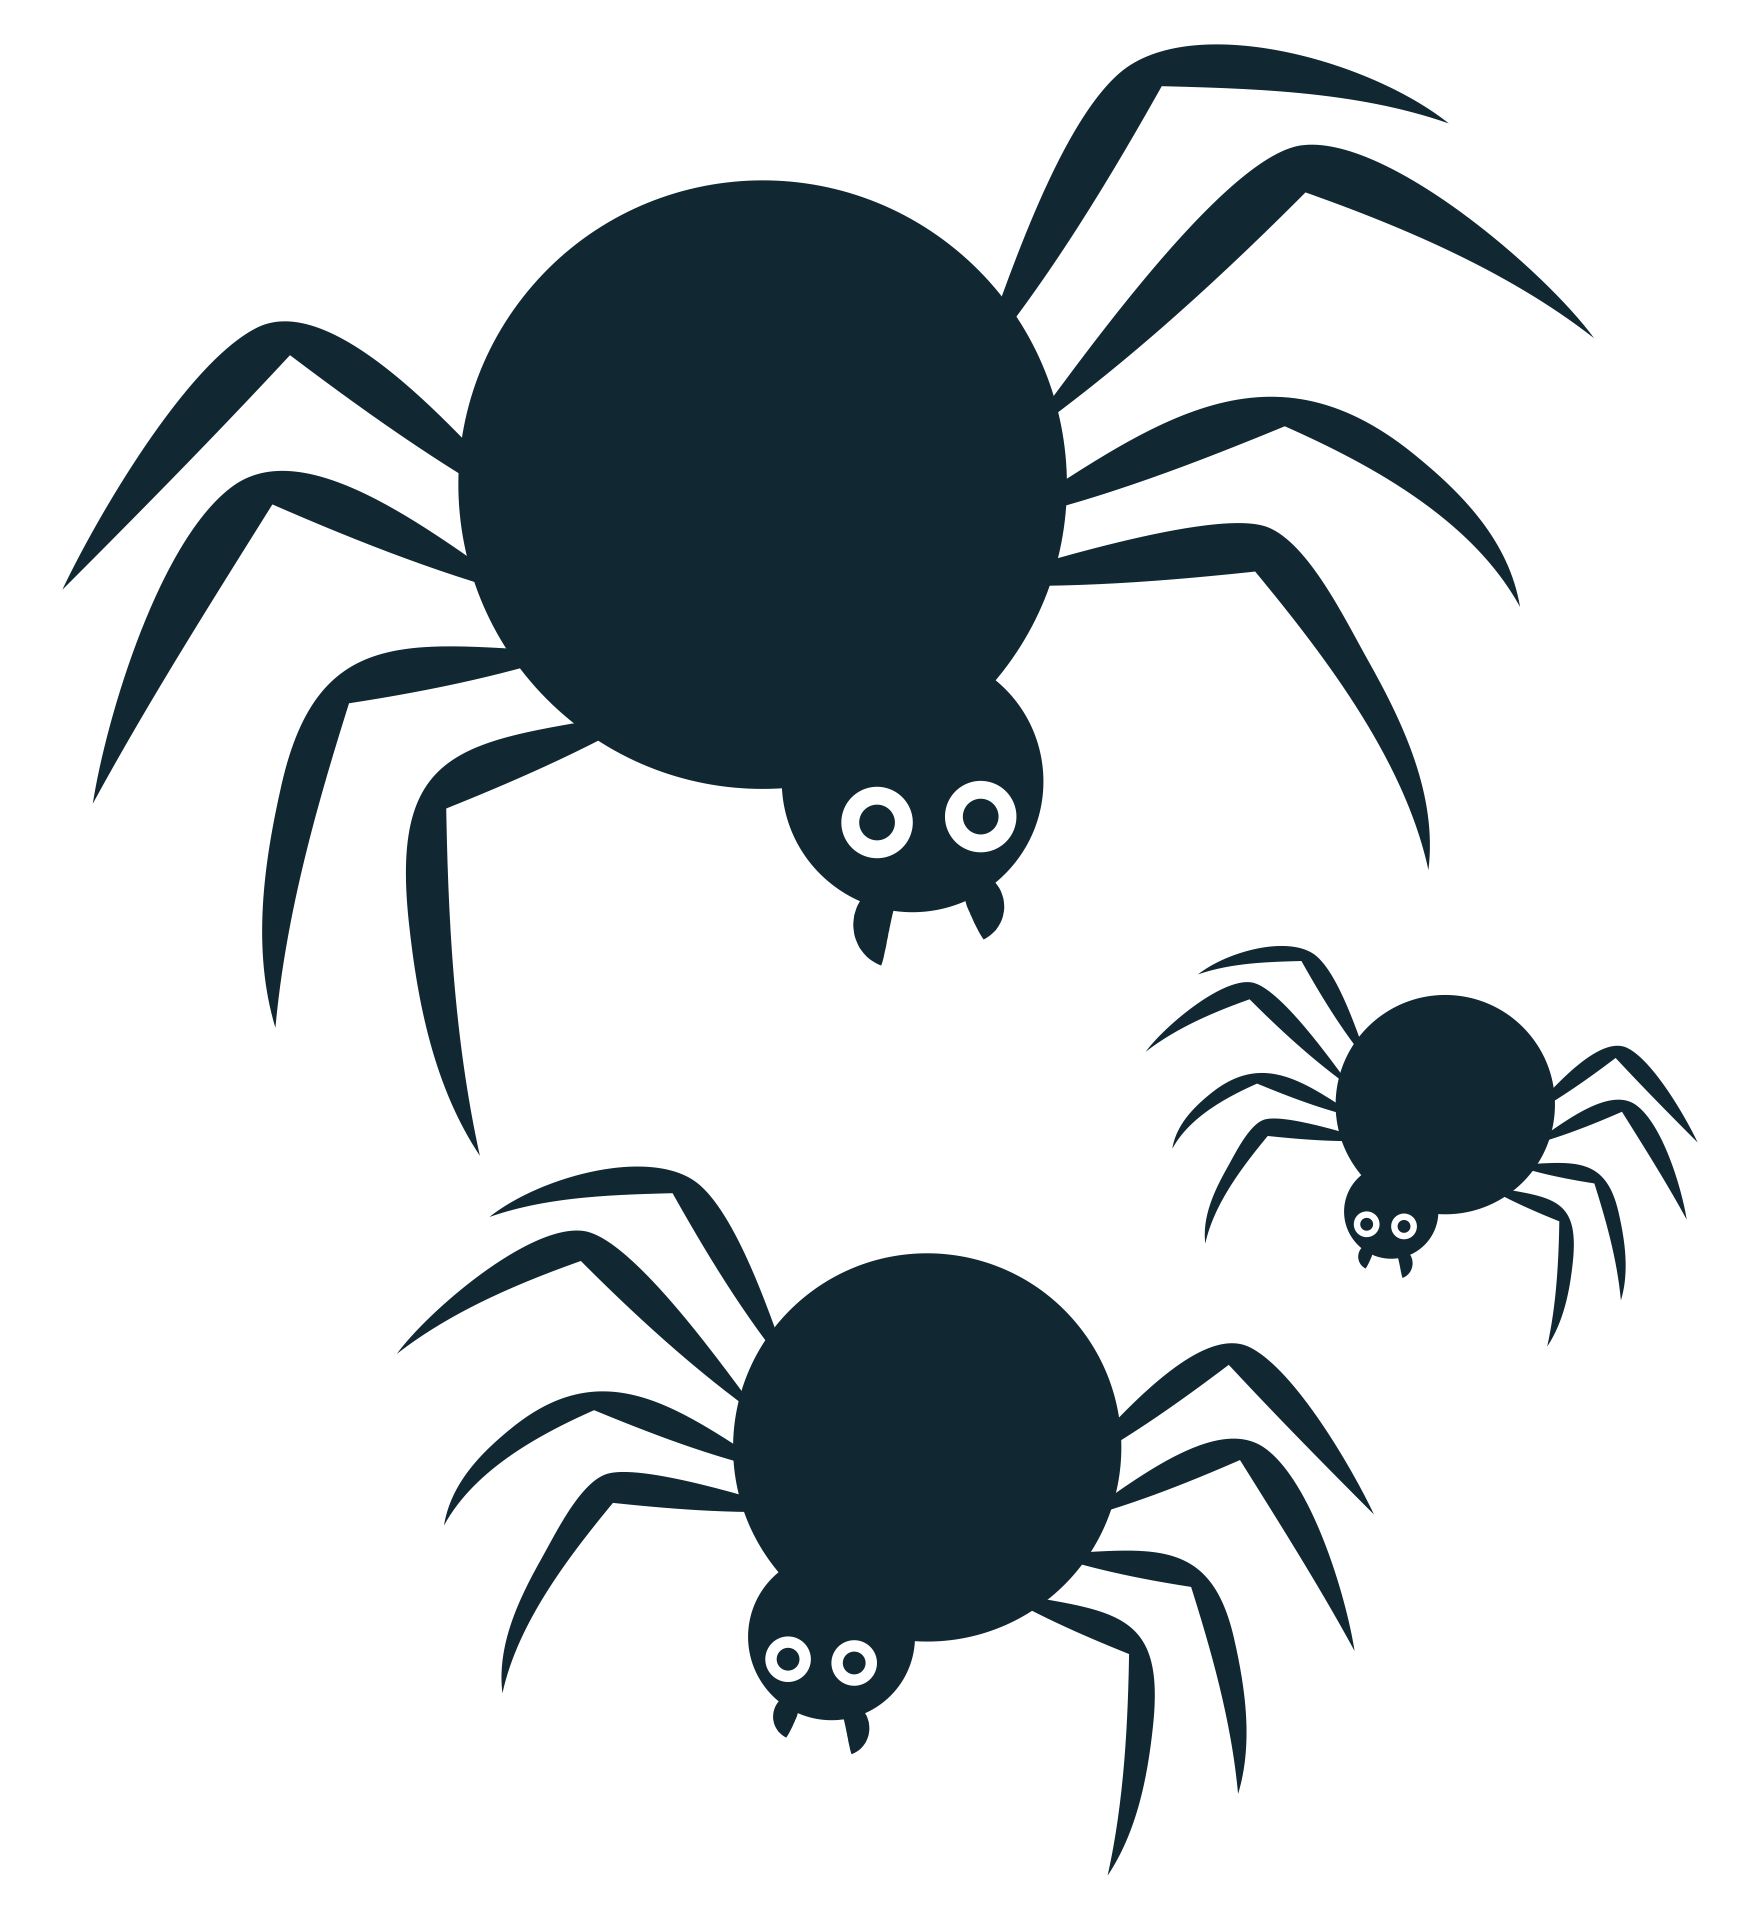 15 Best Spiders For Halloween Printable PDF for Free at Printablee